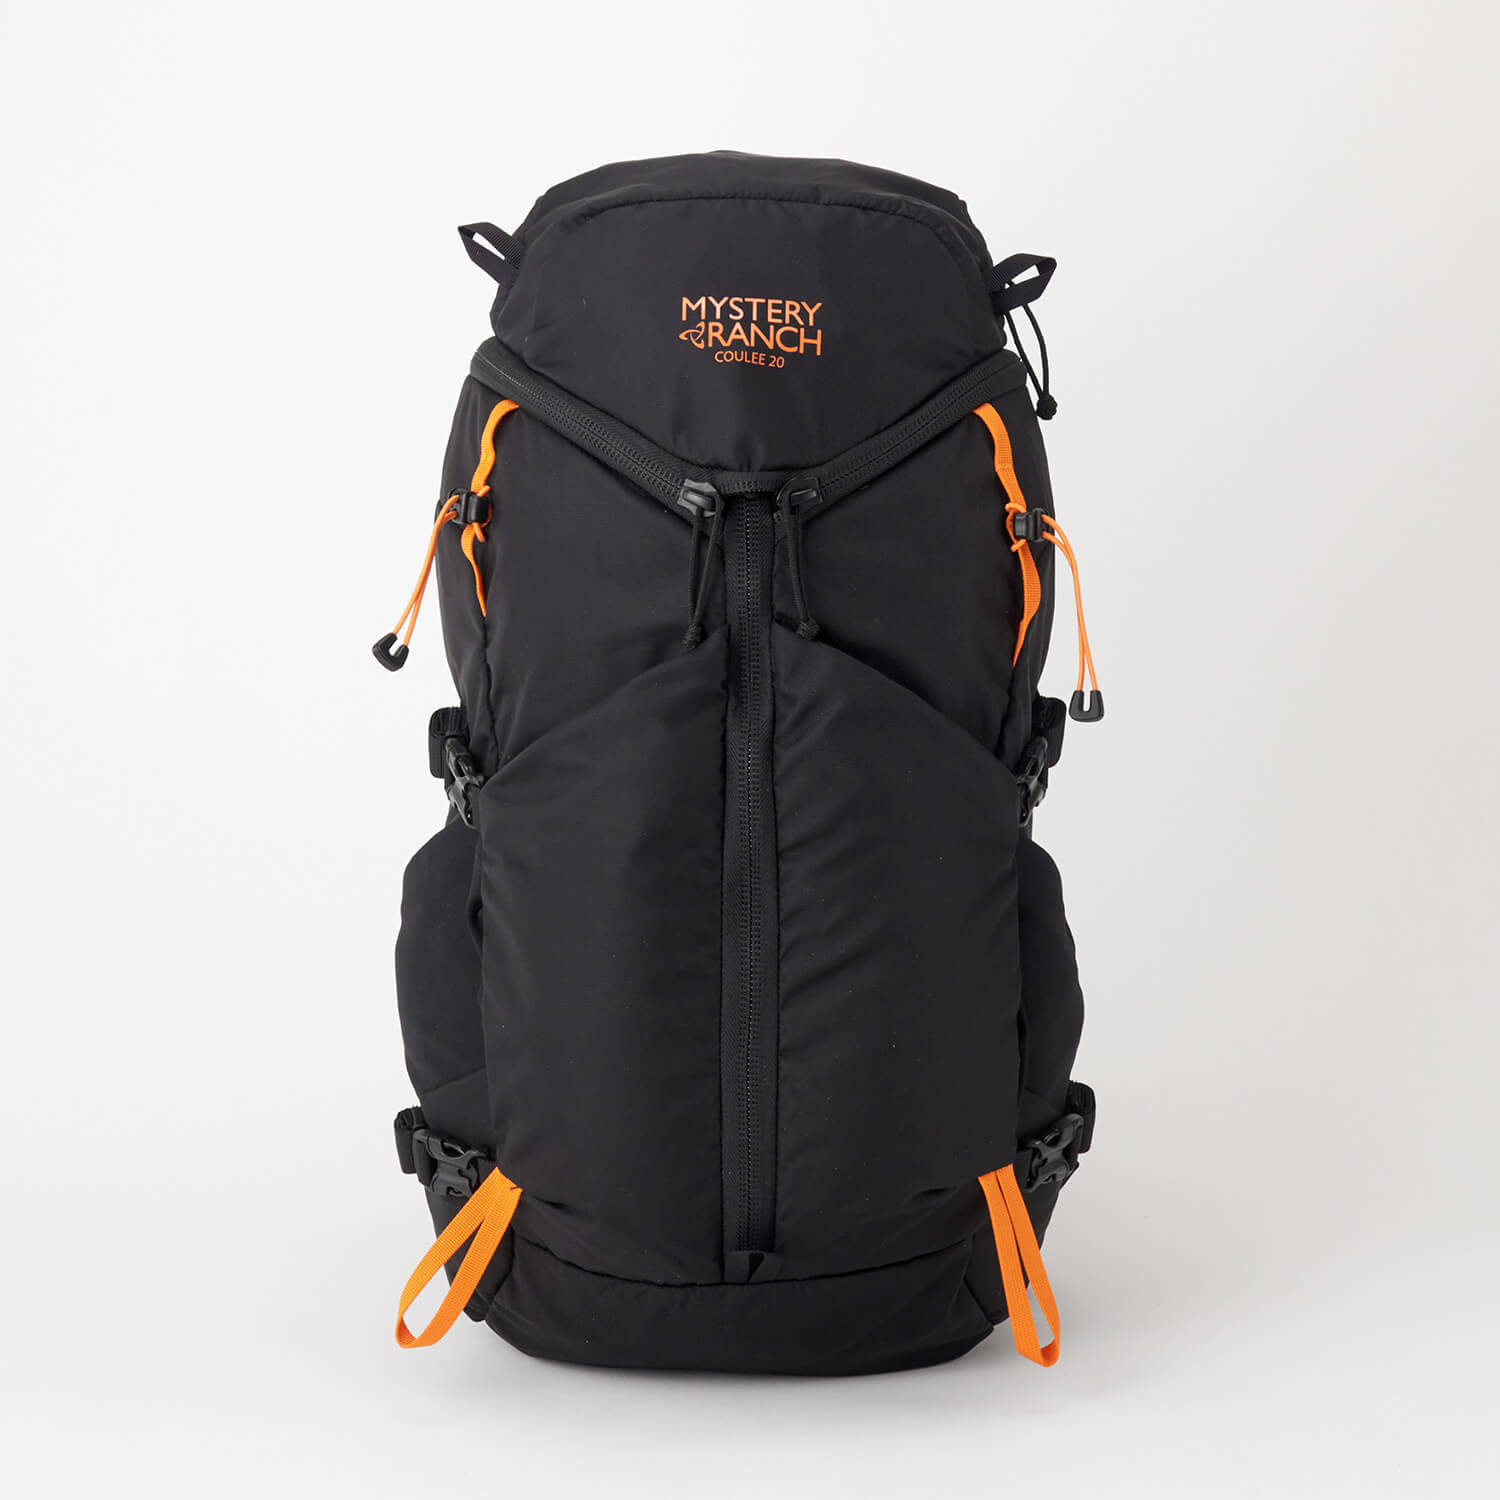 MYSTERY RANCH THE works 登山用リュック backpack今回のMYSTE ...